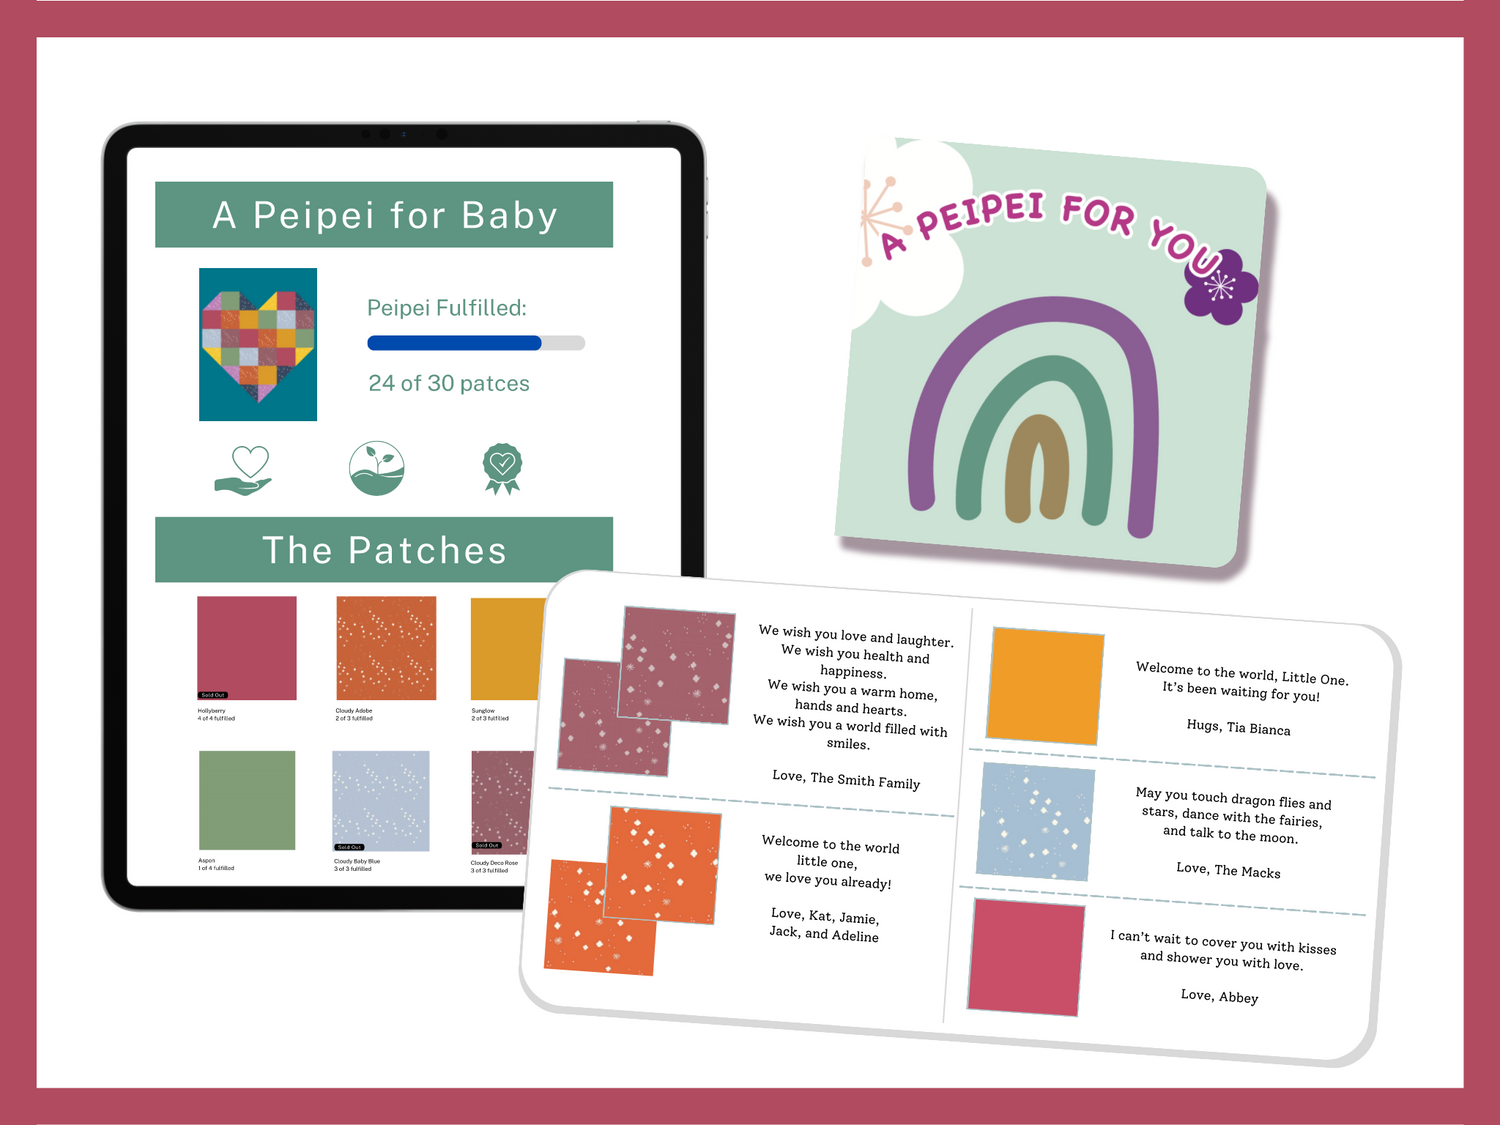 Baby Peipei crowdfunding service. Image has a tablet with a webpage, a closed book, and an open book. The webpage'd text reads "A Peipei for Baby" and "The Patches"  and images show a wuilt, a progress bar, and the patches in the quilt available for purchase. The title of the closed book is "A Peipei for You" and the open book shows people's messages alongside images of the patches that they purchased